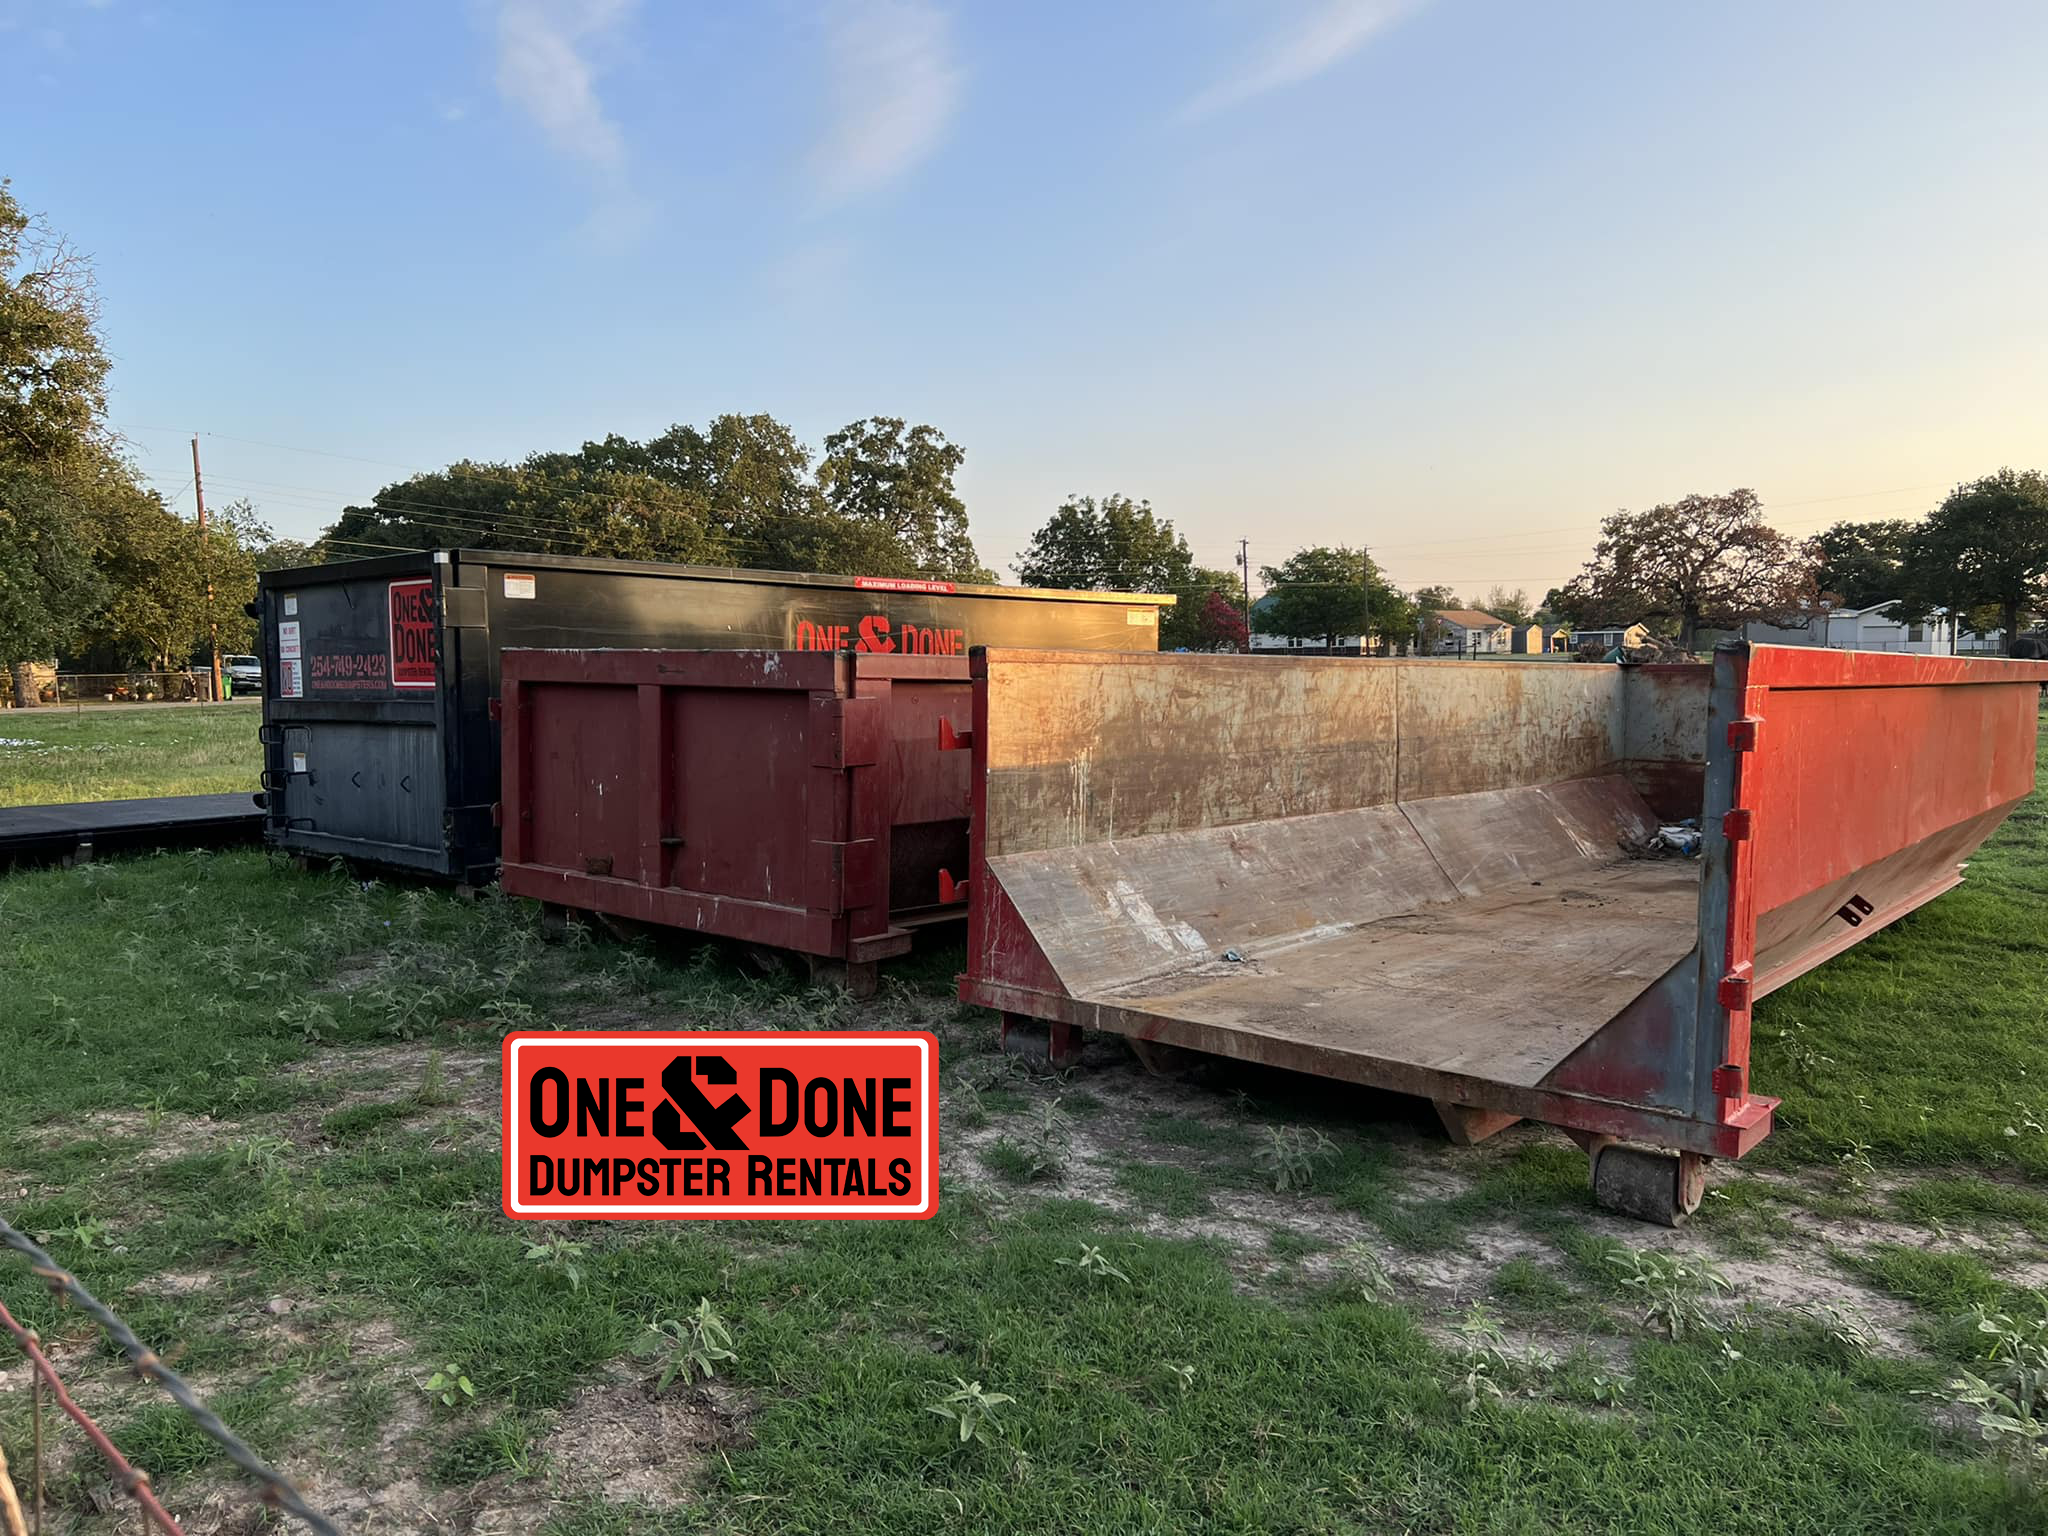 Garbage Dumpster Rental One and Done Dumpster Rentals China Spring TX Business Owners Love